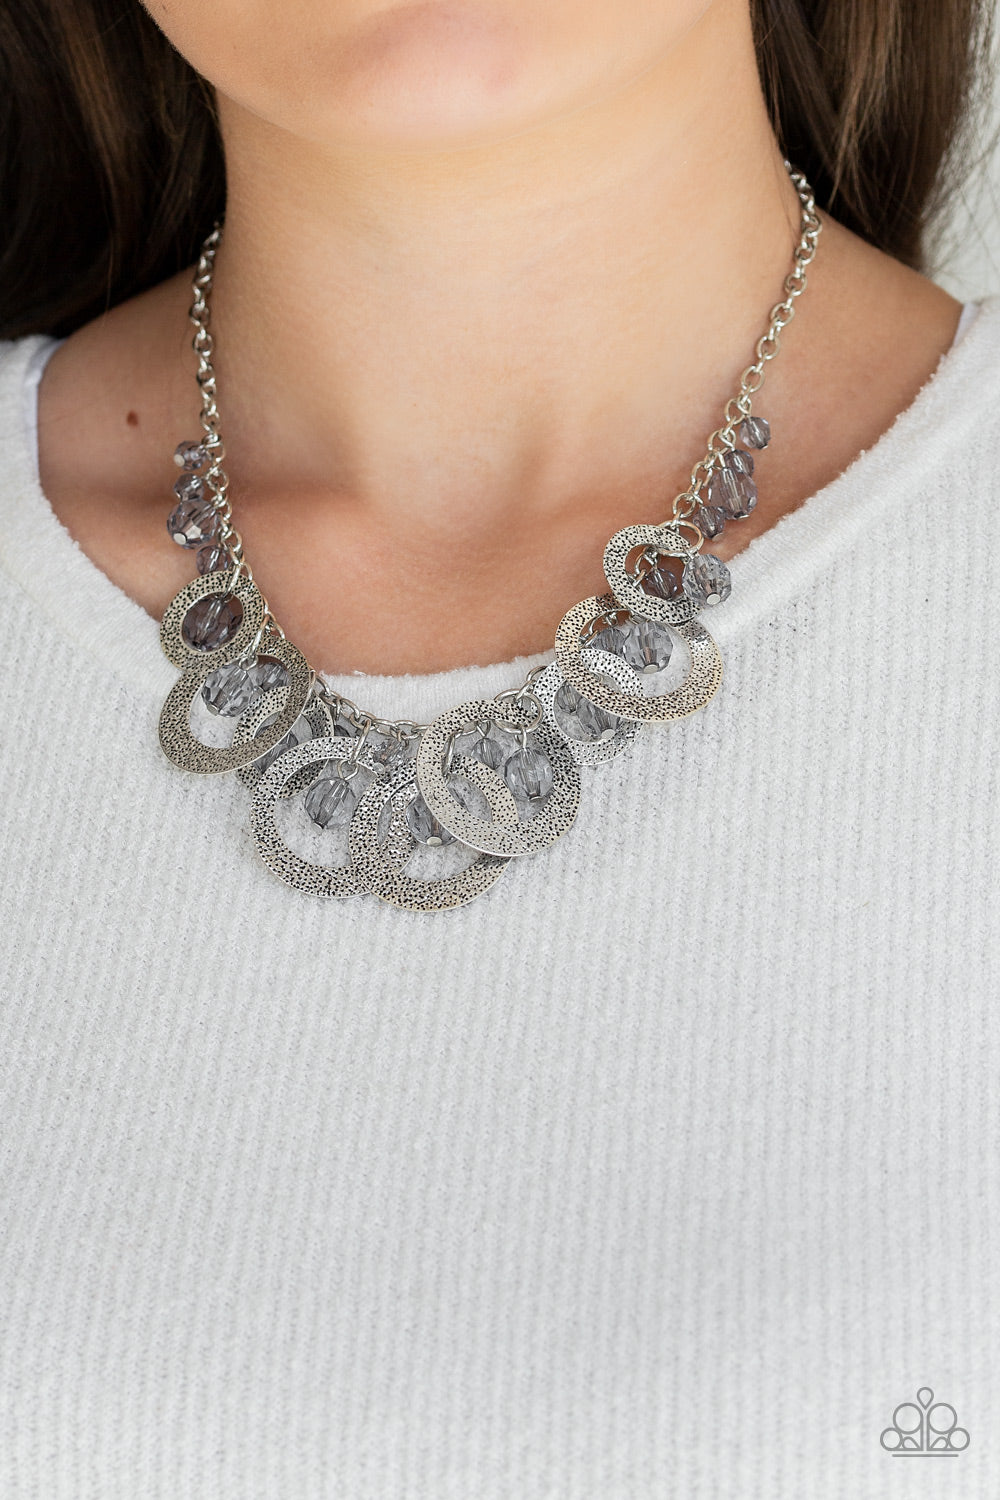 Turn It Up- Silver Necklace- Paparazzi Accessories